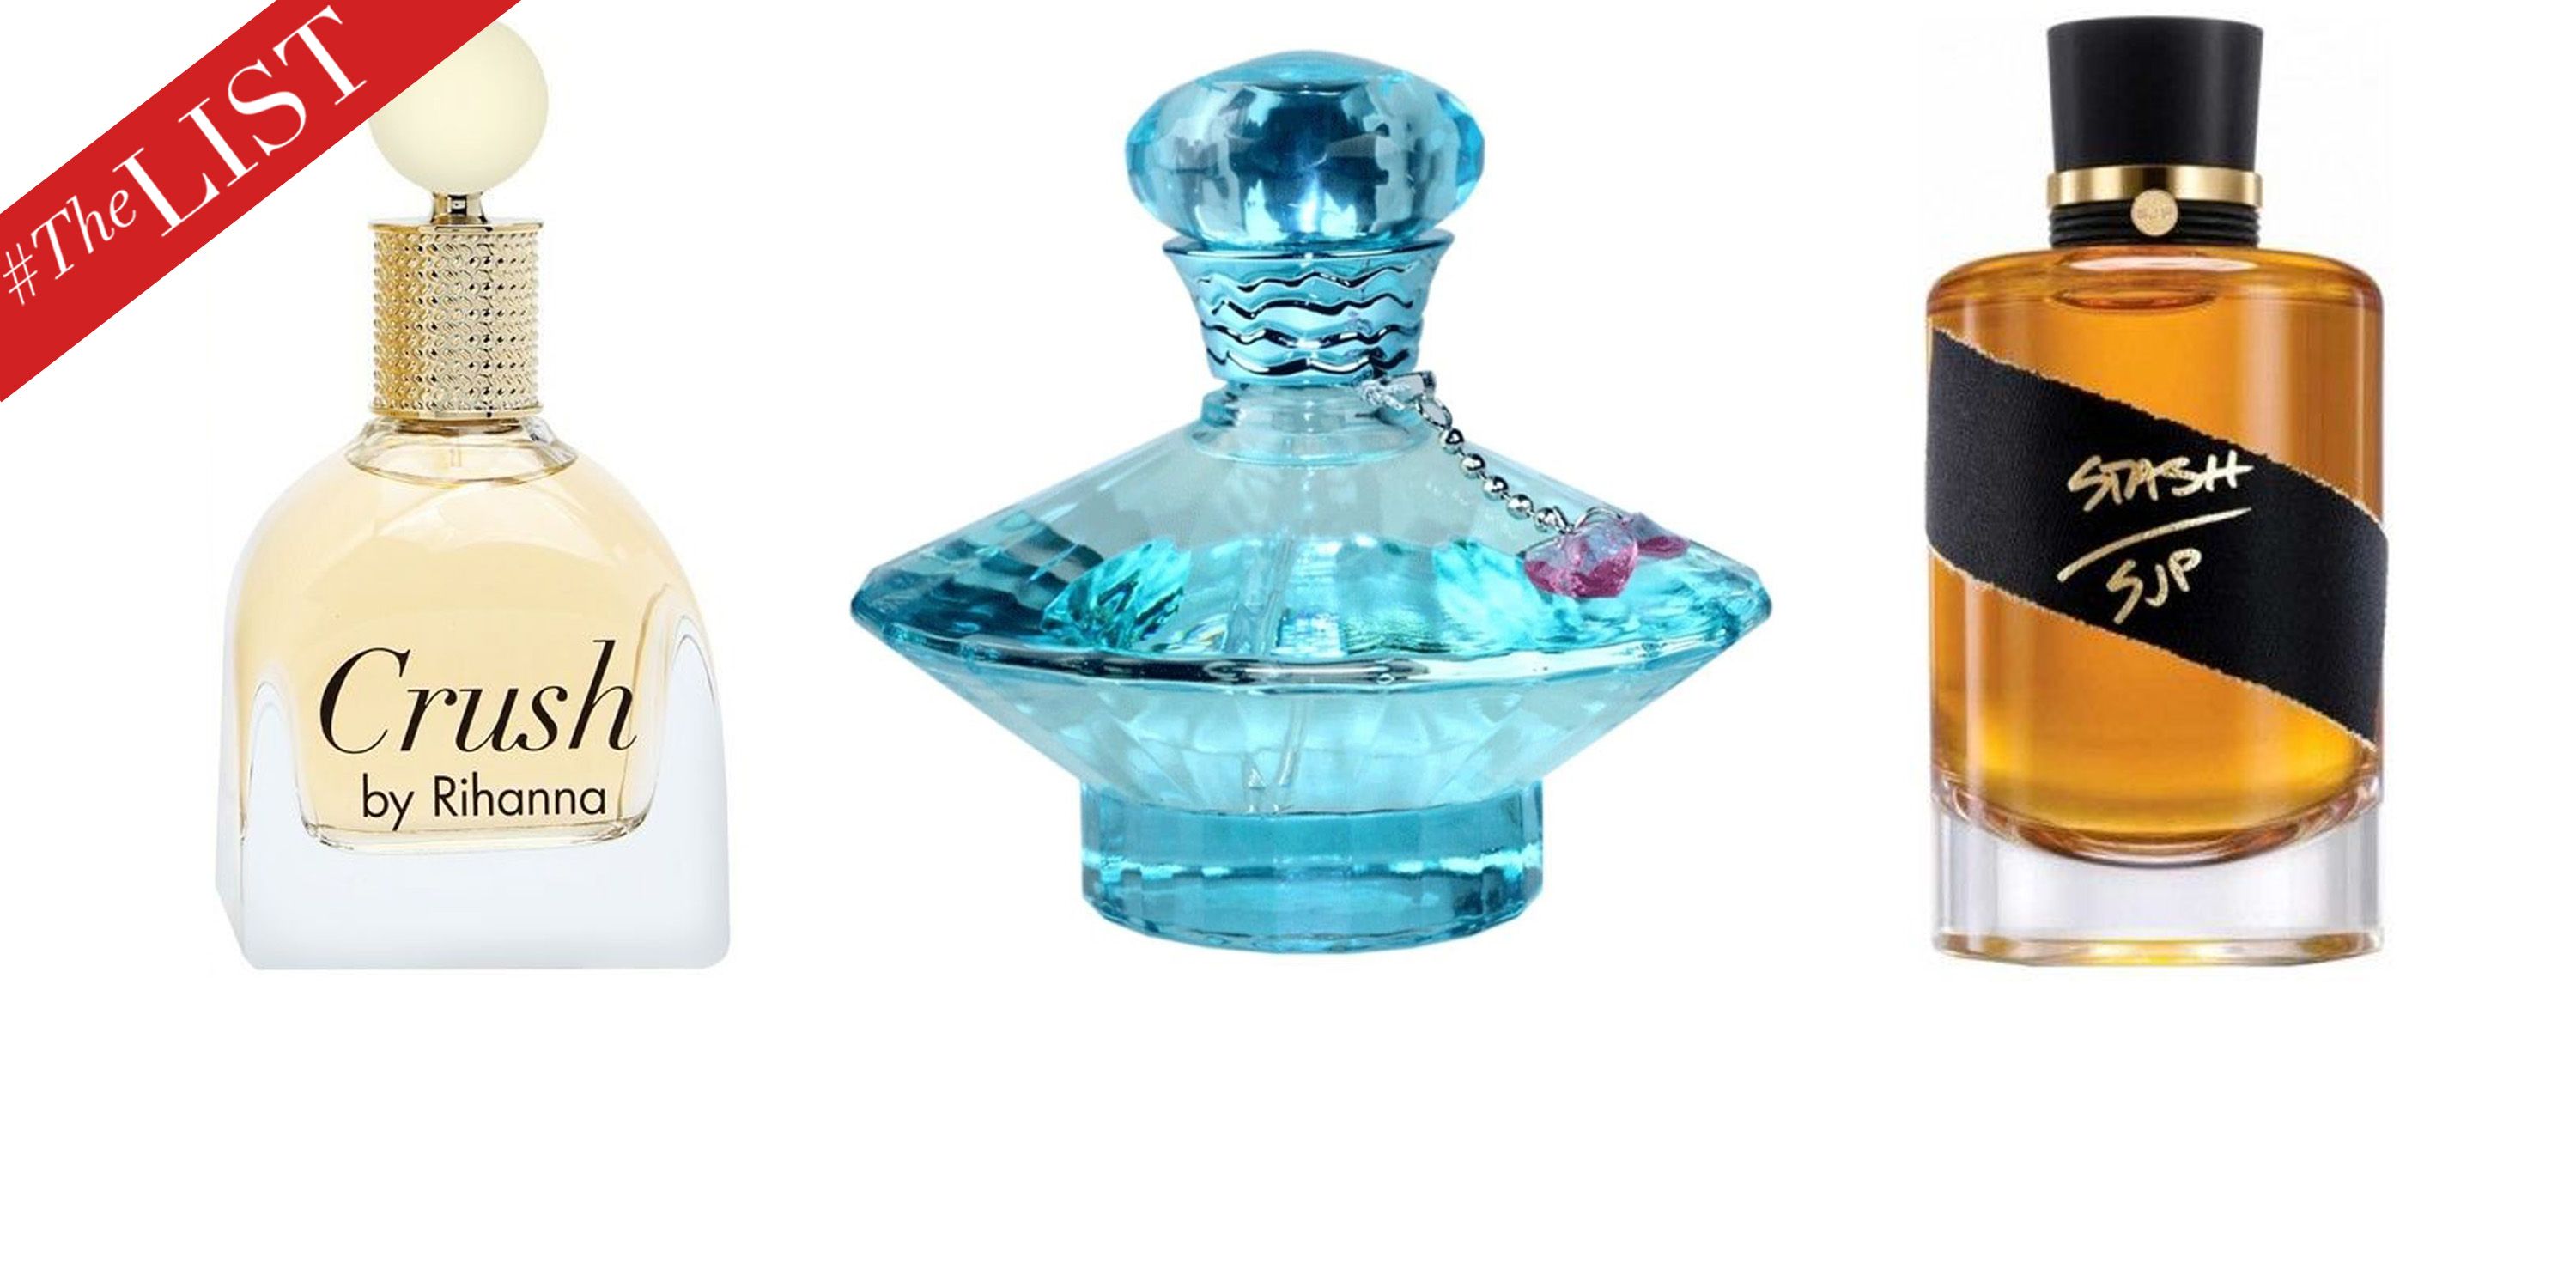 The Best Celebrity Perfumes And Fragrances - Celebrity Scents To Buy